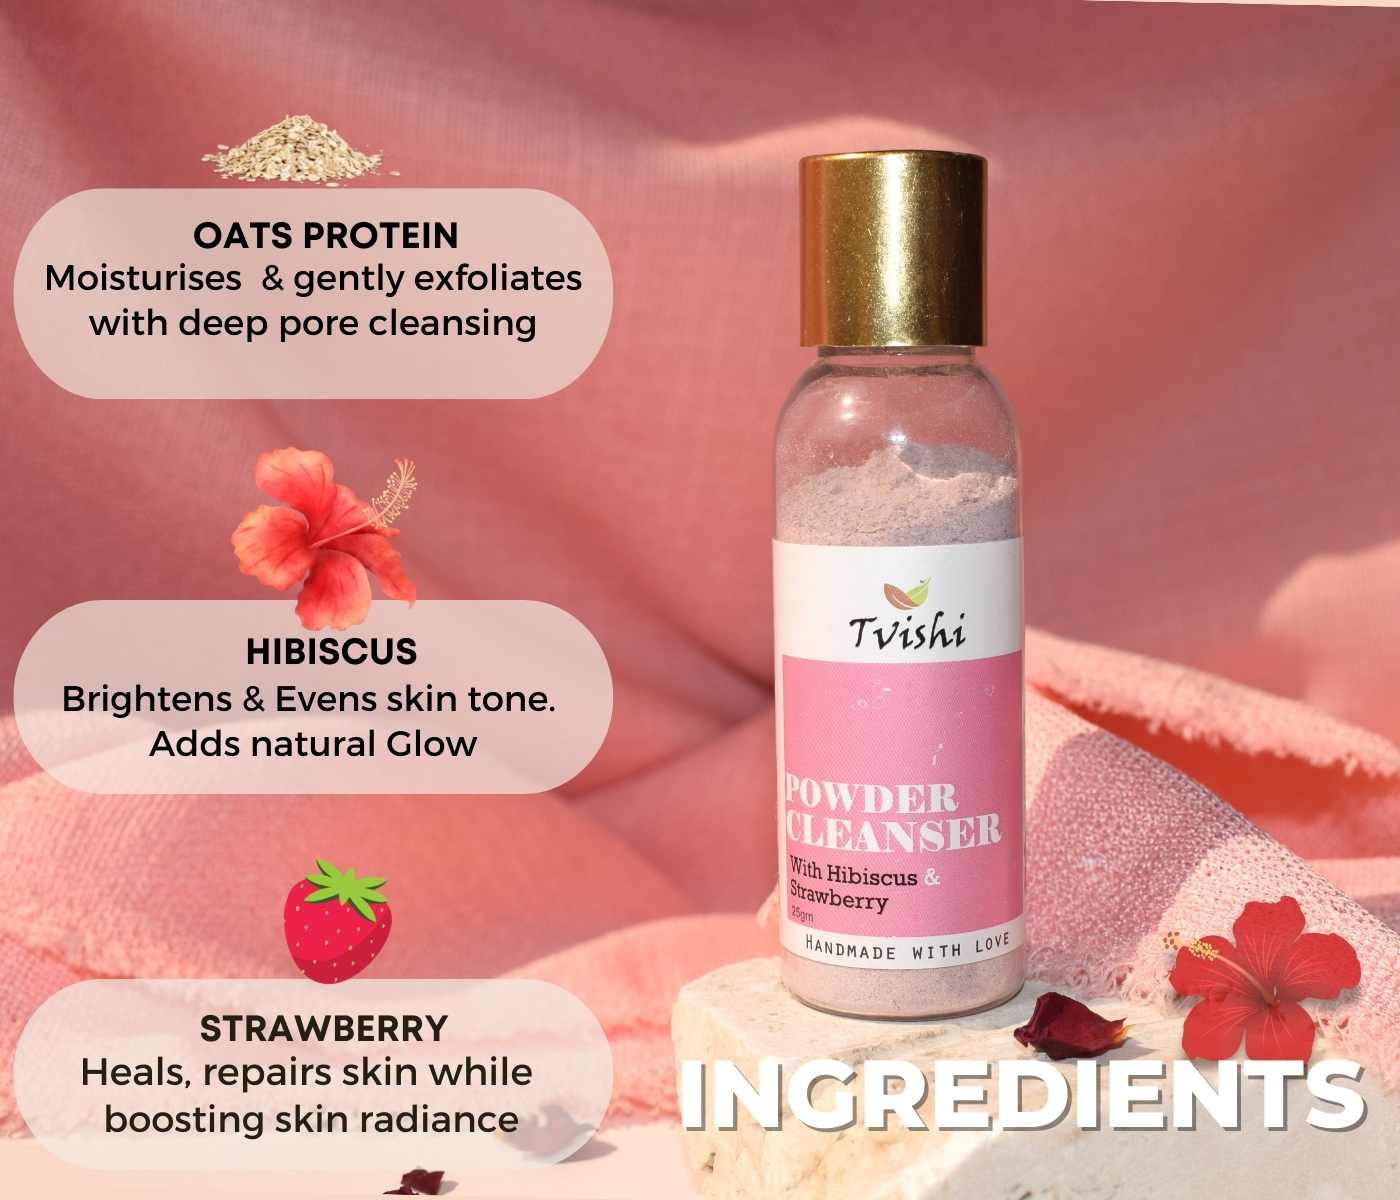 Pink Powder to Foaming Cleanser